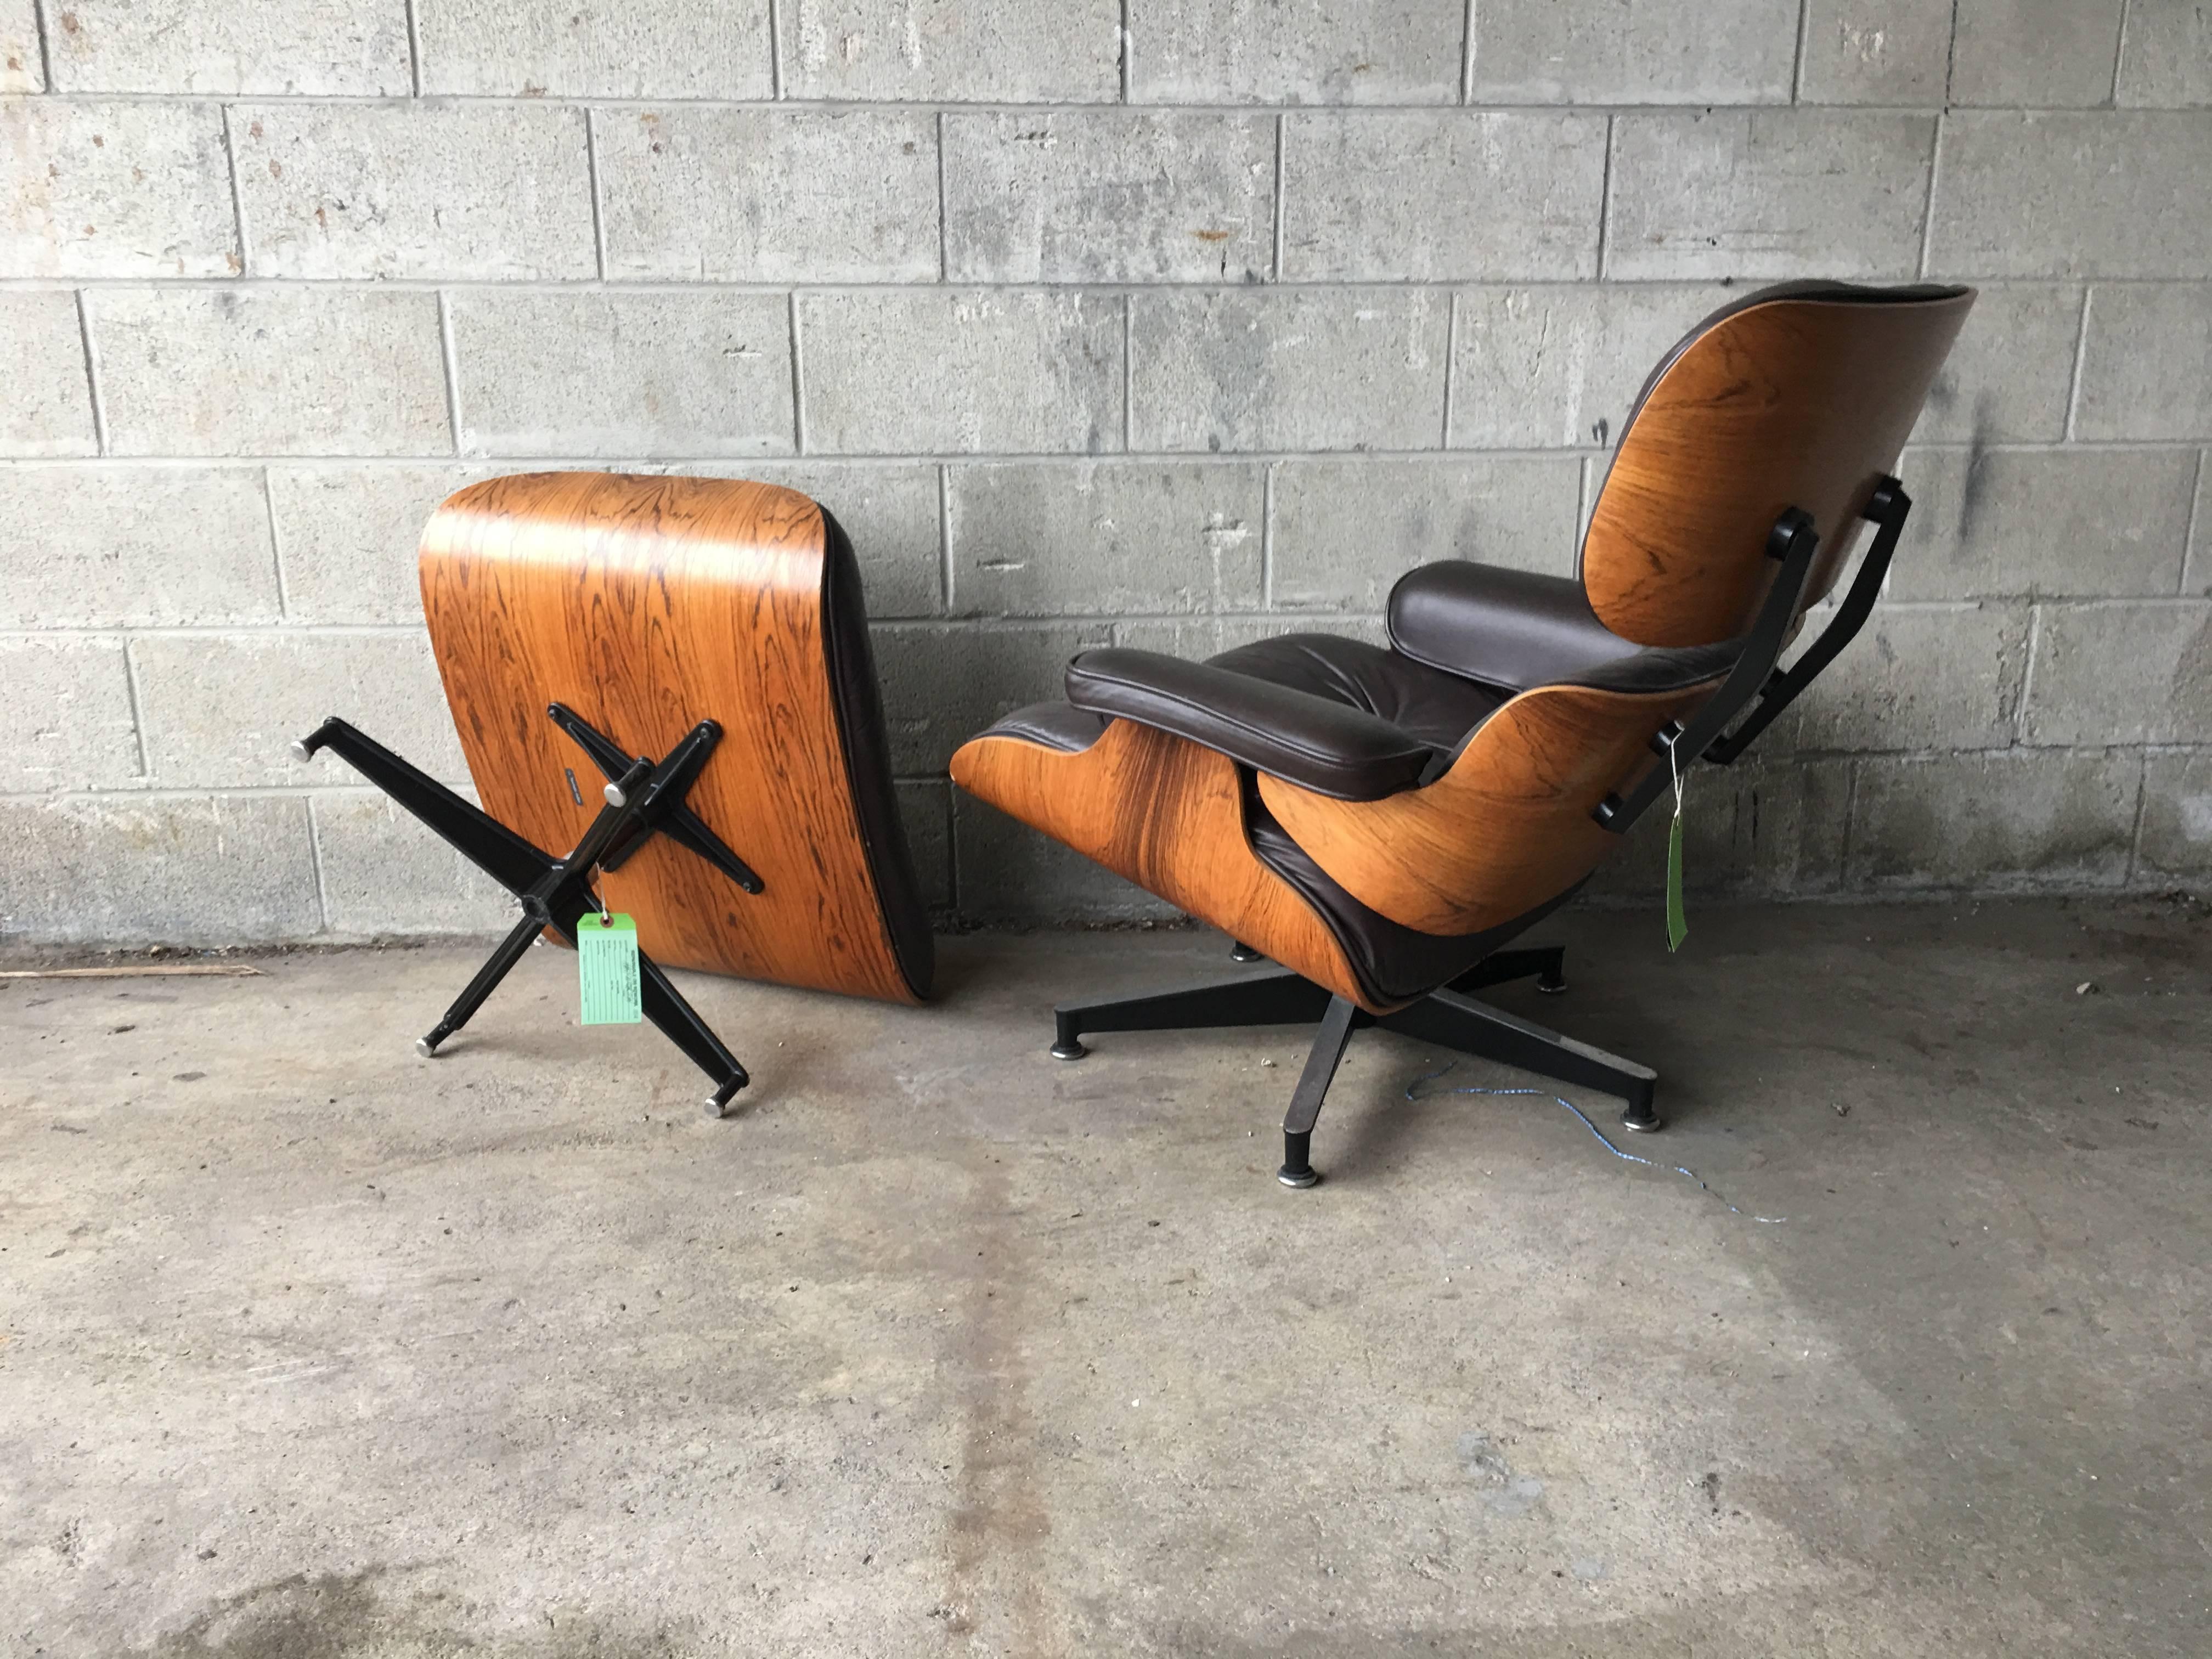 Herman Miller Eames rosewood lounge and ottoman, 1970s edition in original condition. Brown leather cushions.